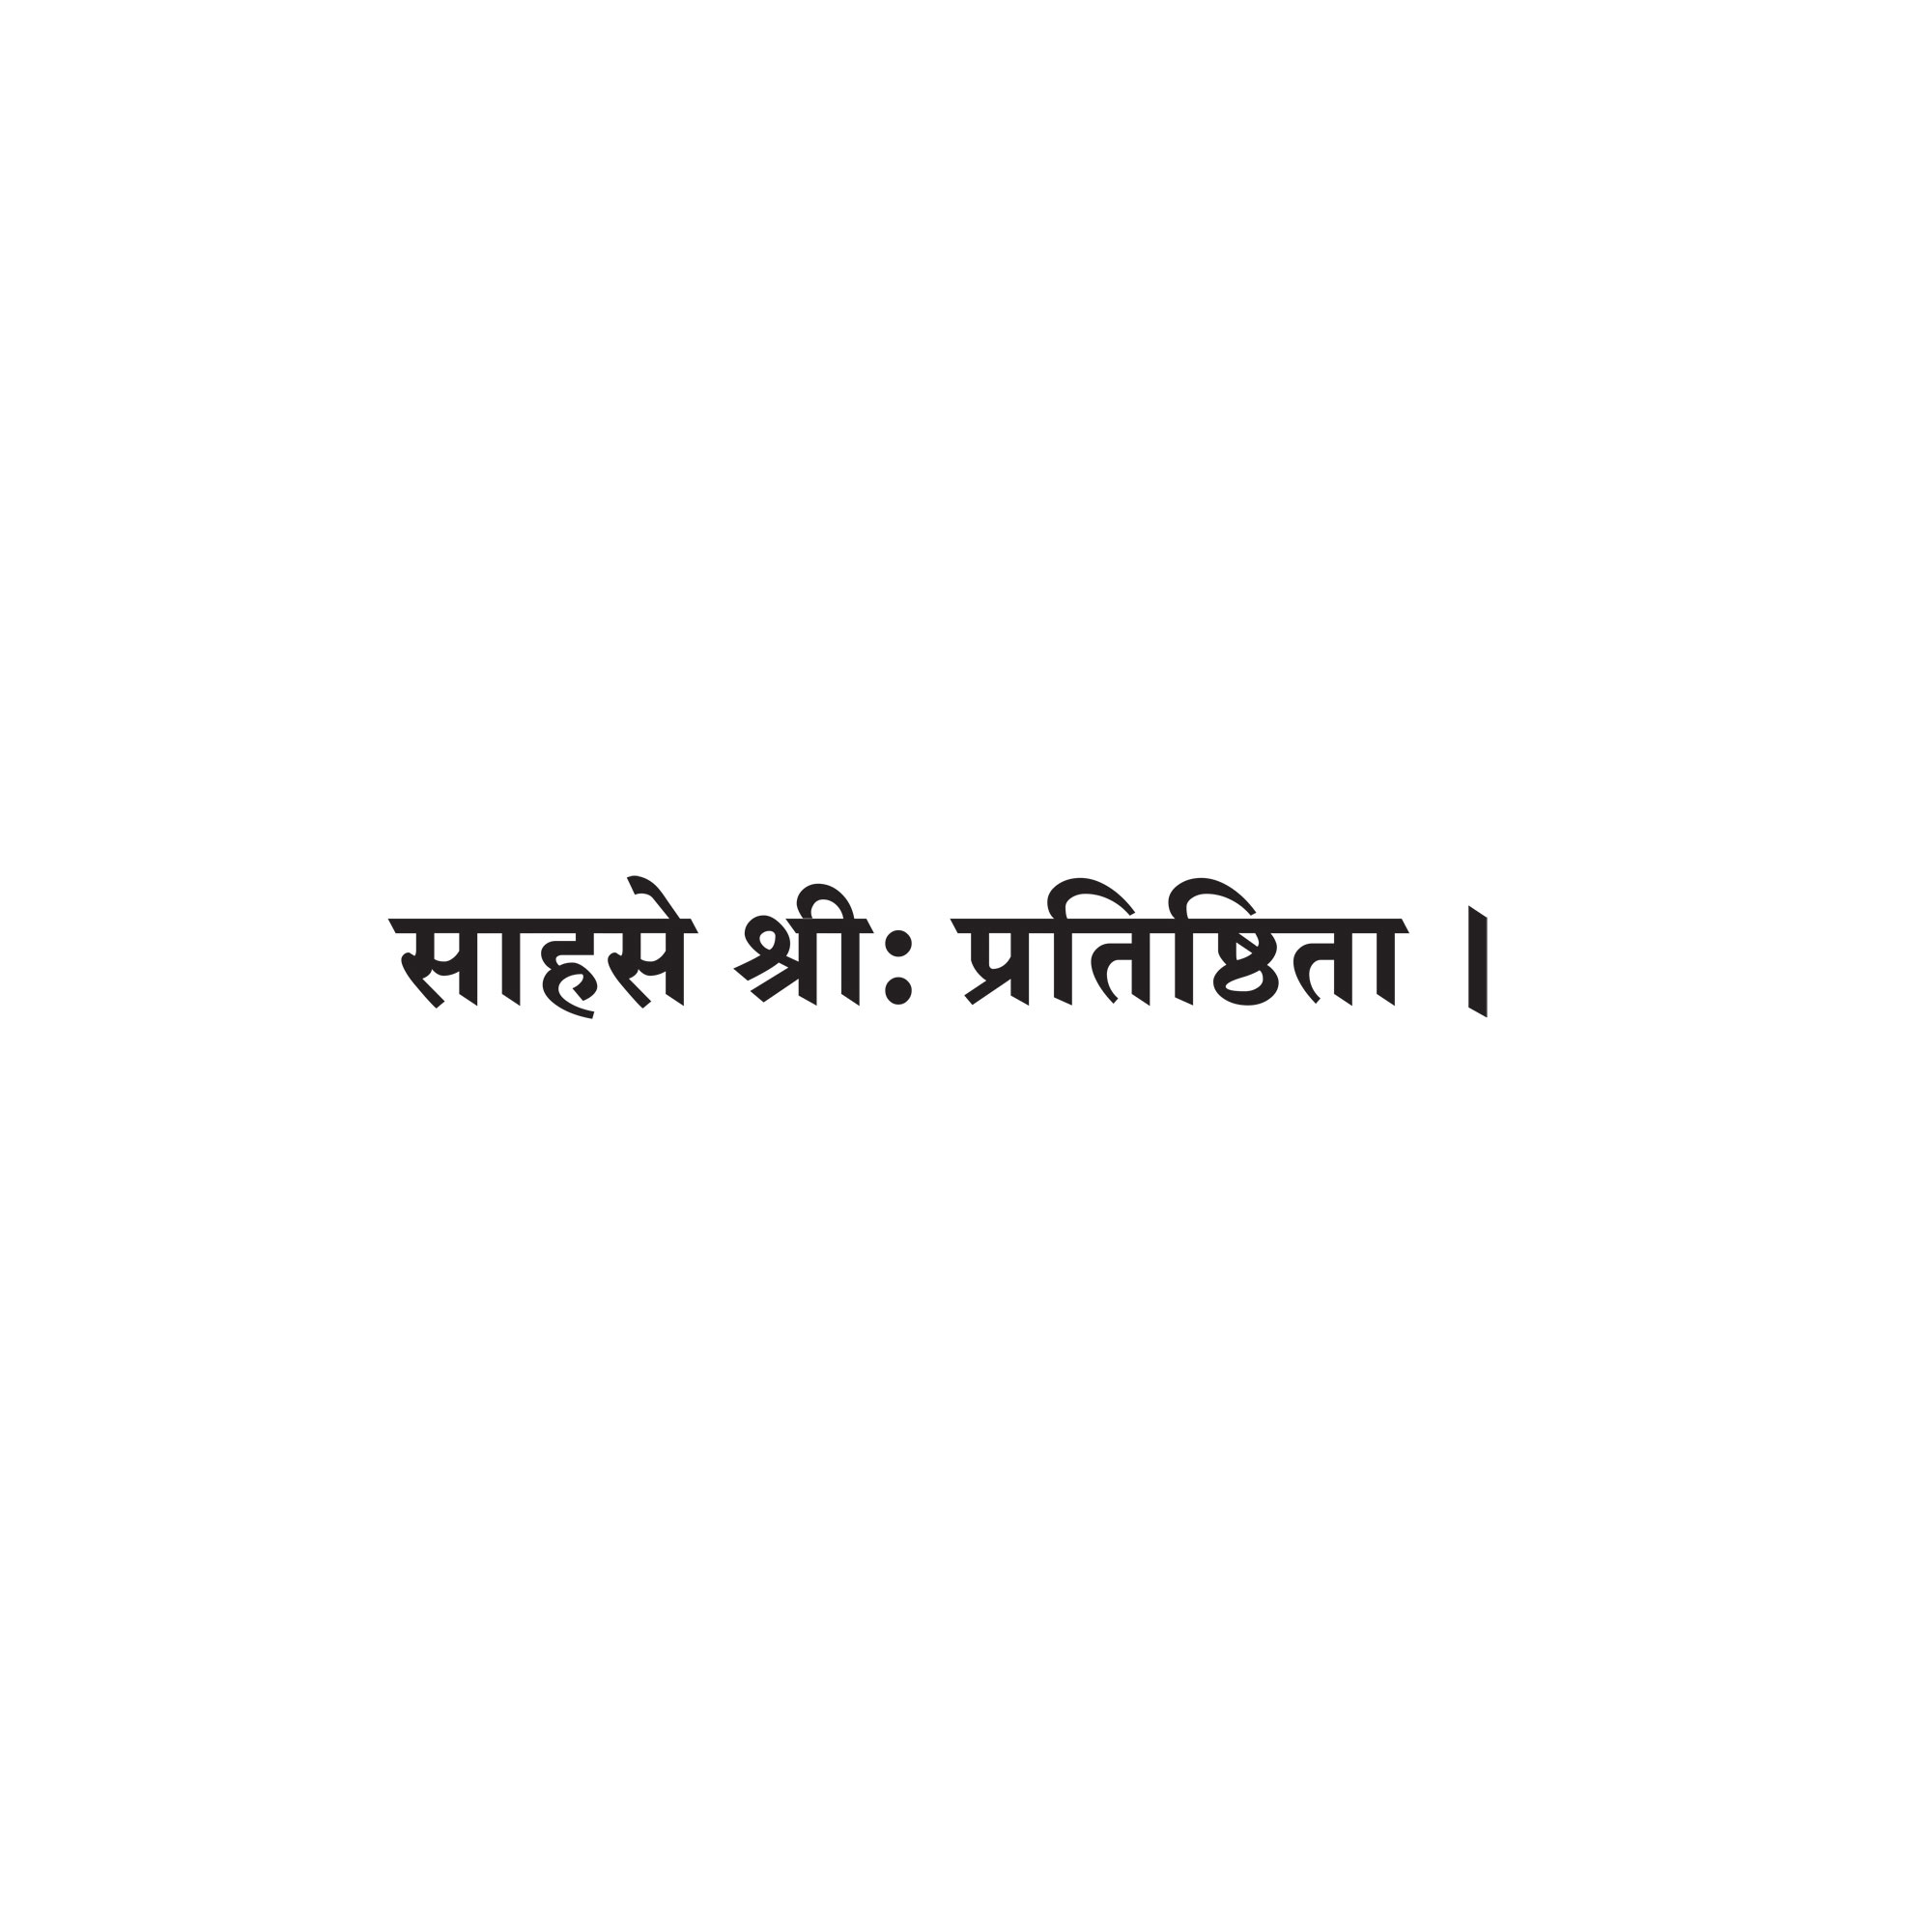 75+ Best Sanskrit Tattoos Quotes and Meanings (2021) - TattoosBoyGirl | Sanskrit  tattoo, Mantra tattoo, Alien tattoo